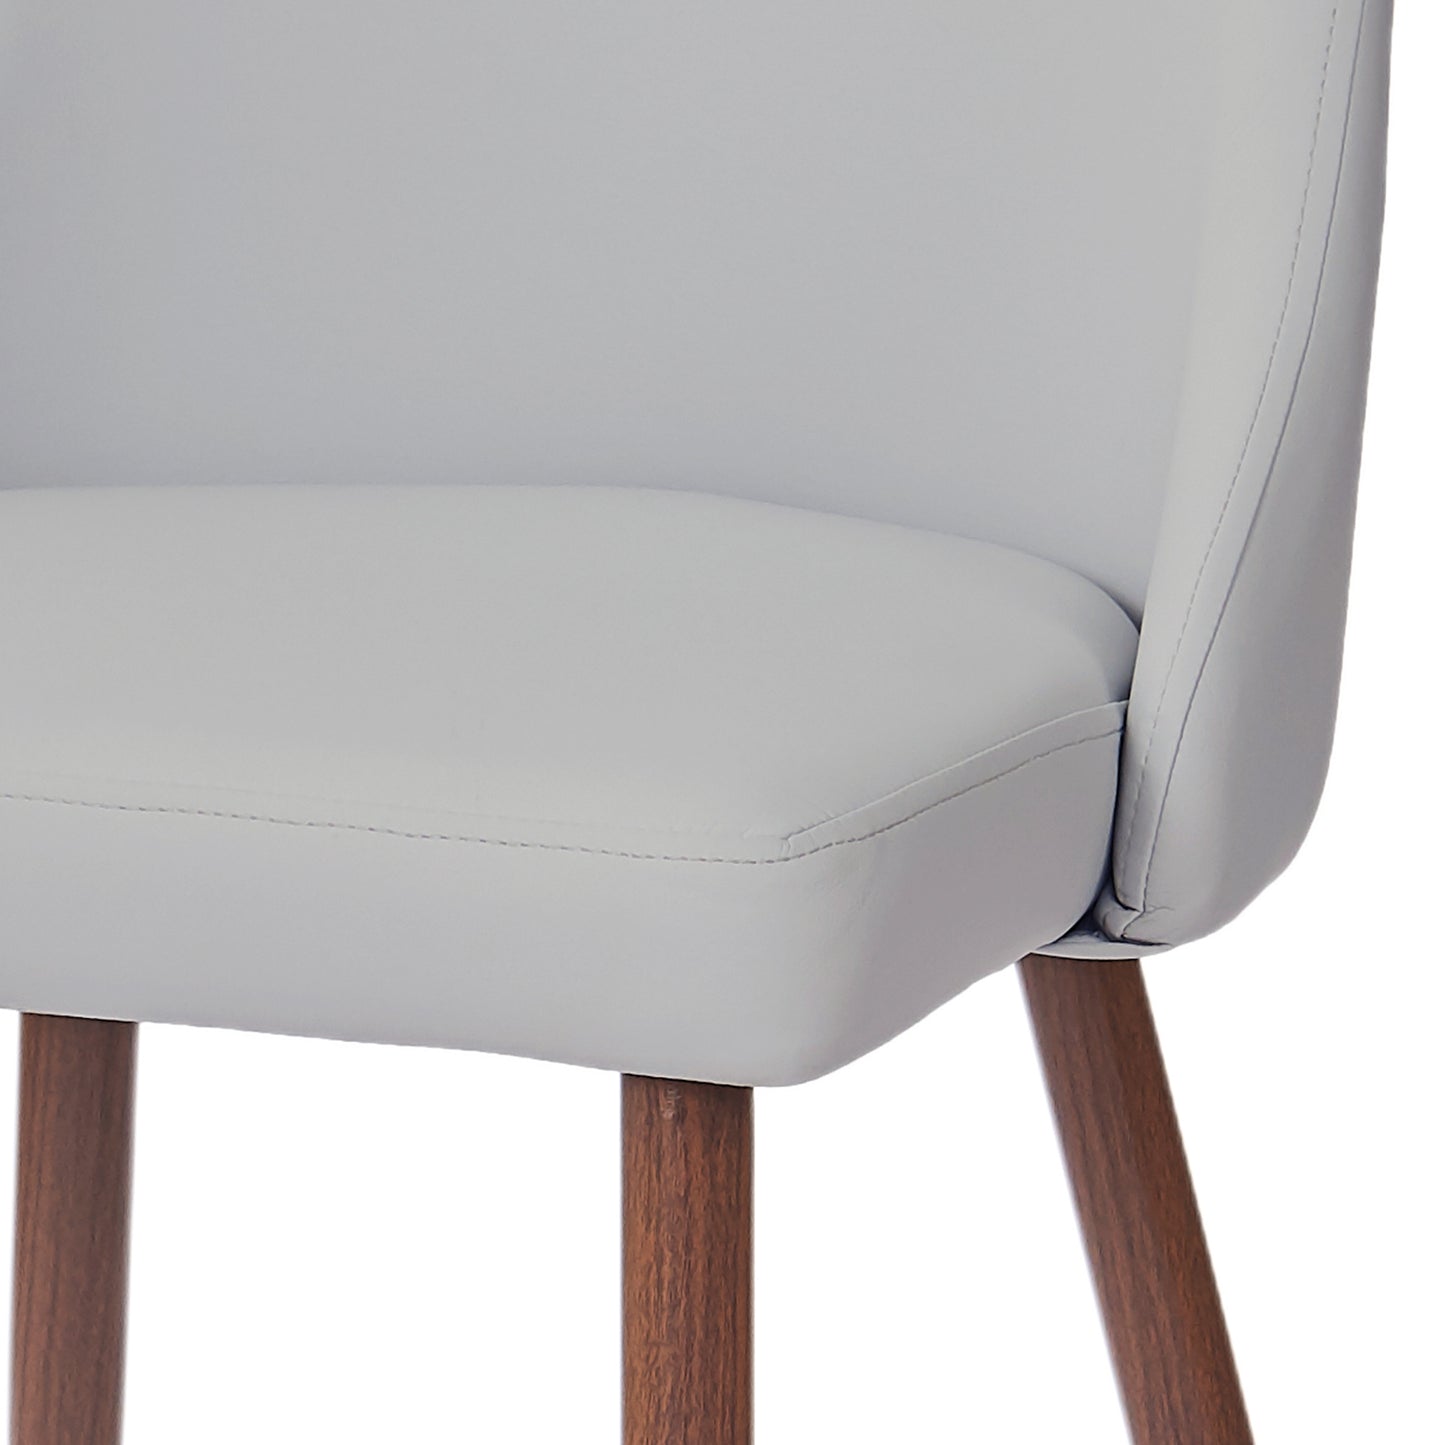 (CORA GREY LEATHER- 2 PACK)- DINING CHAIRS